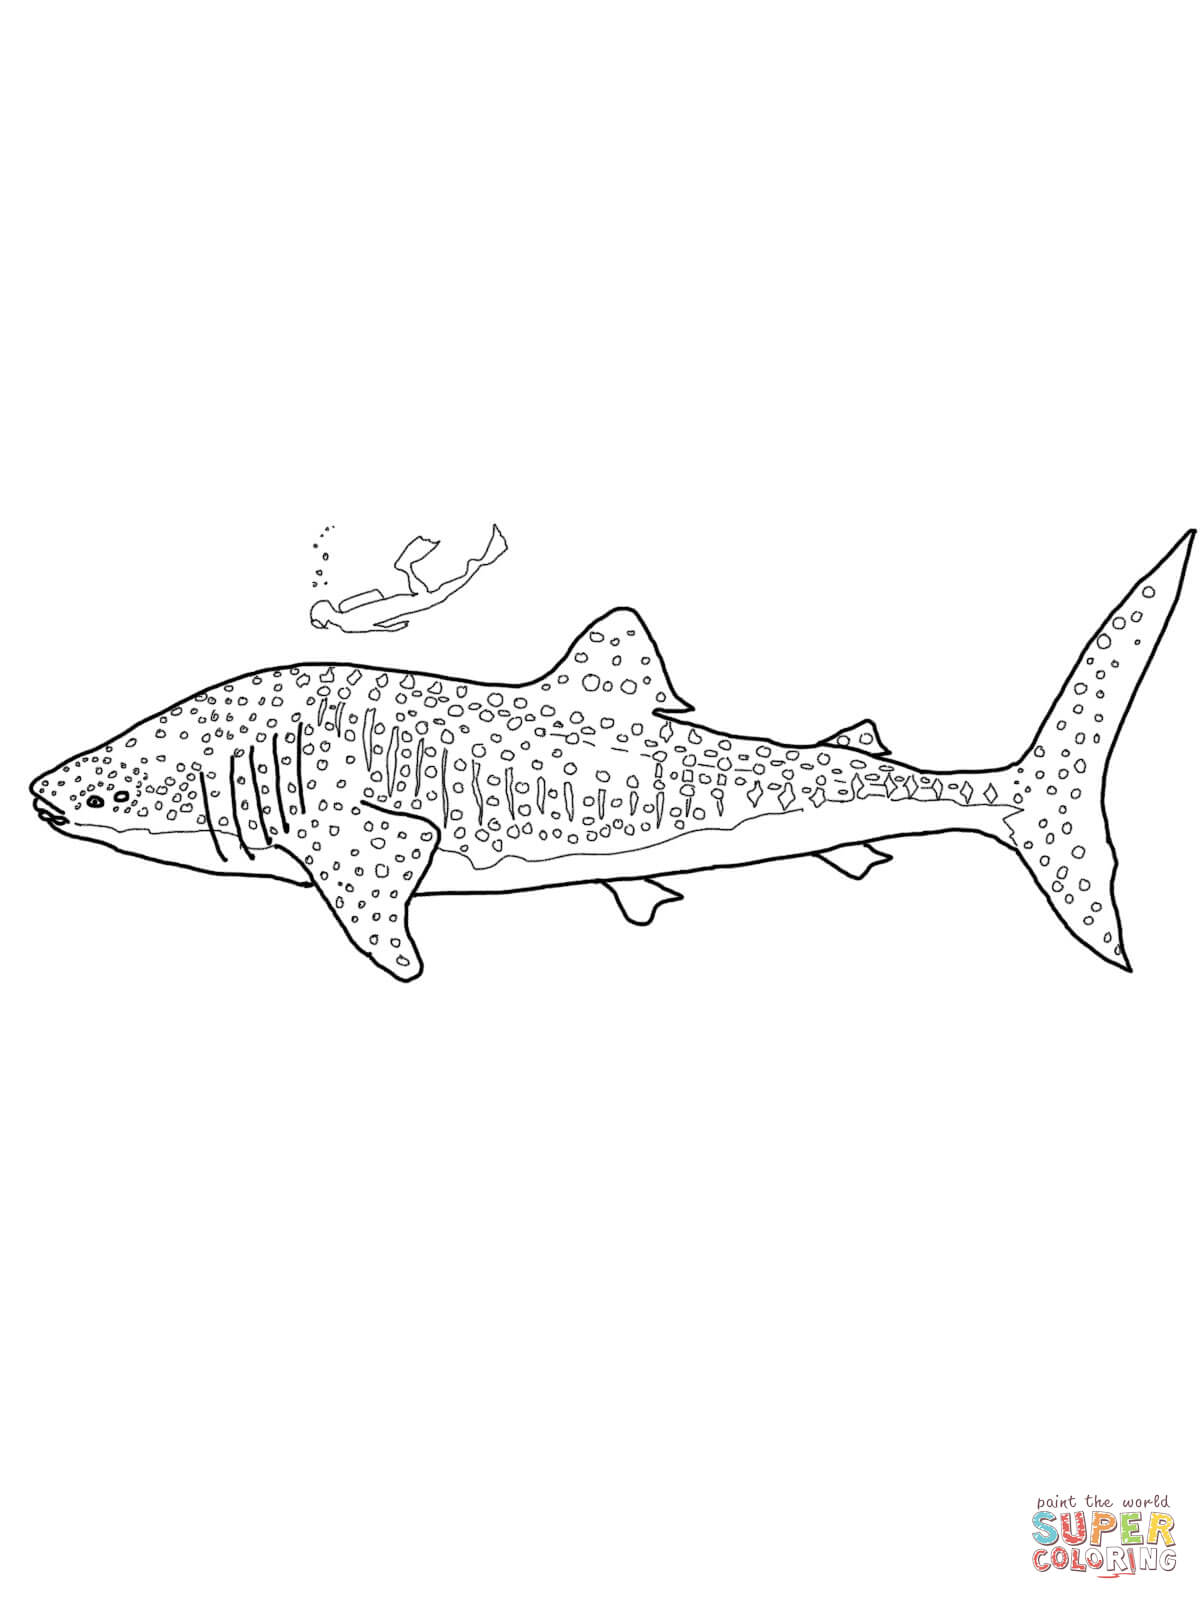 Whale Shark coloring #9, Download drawings